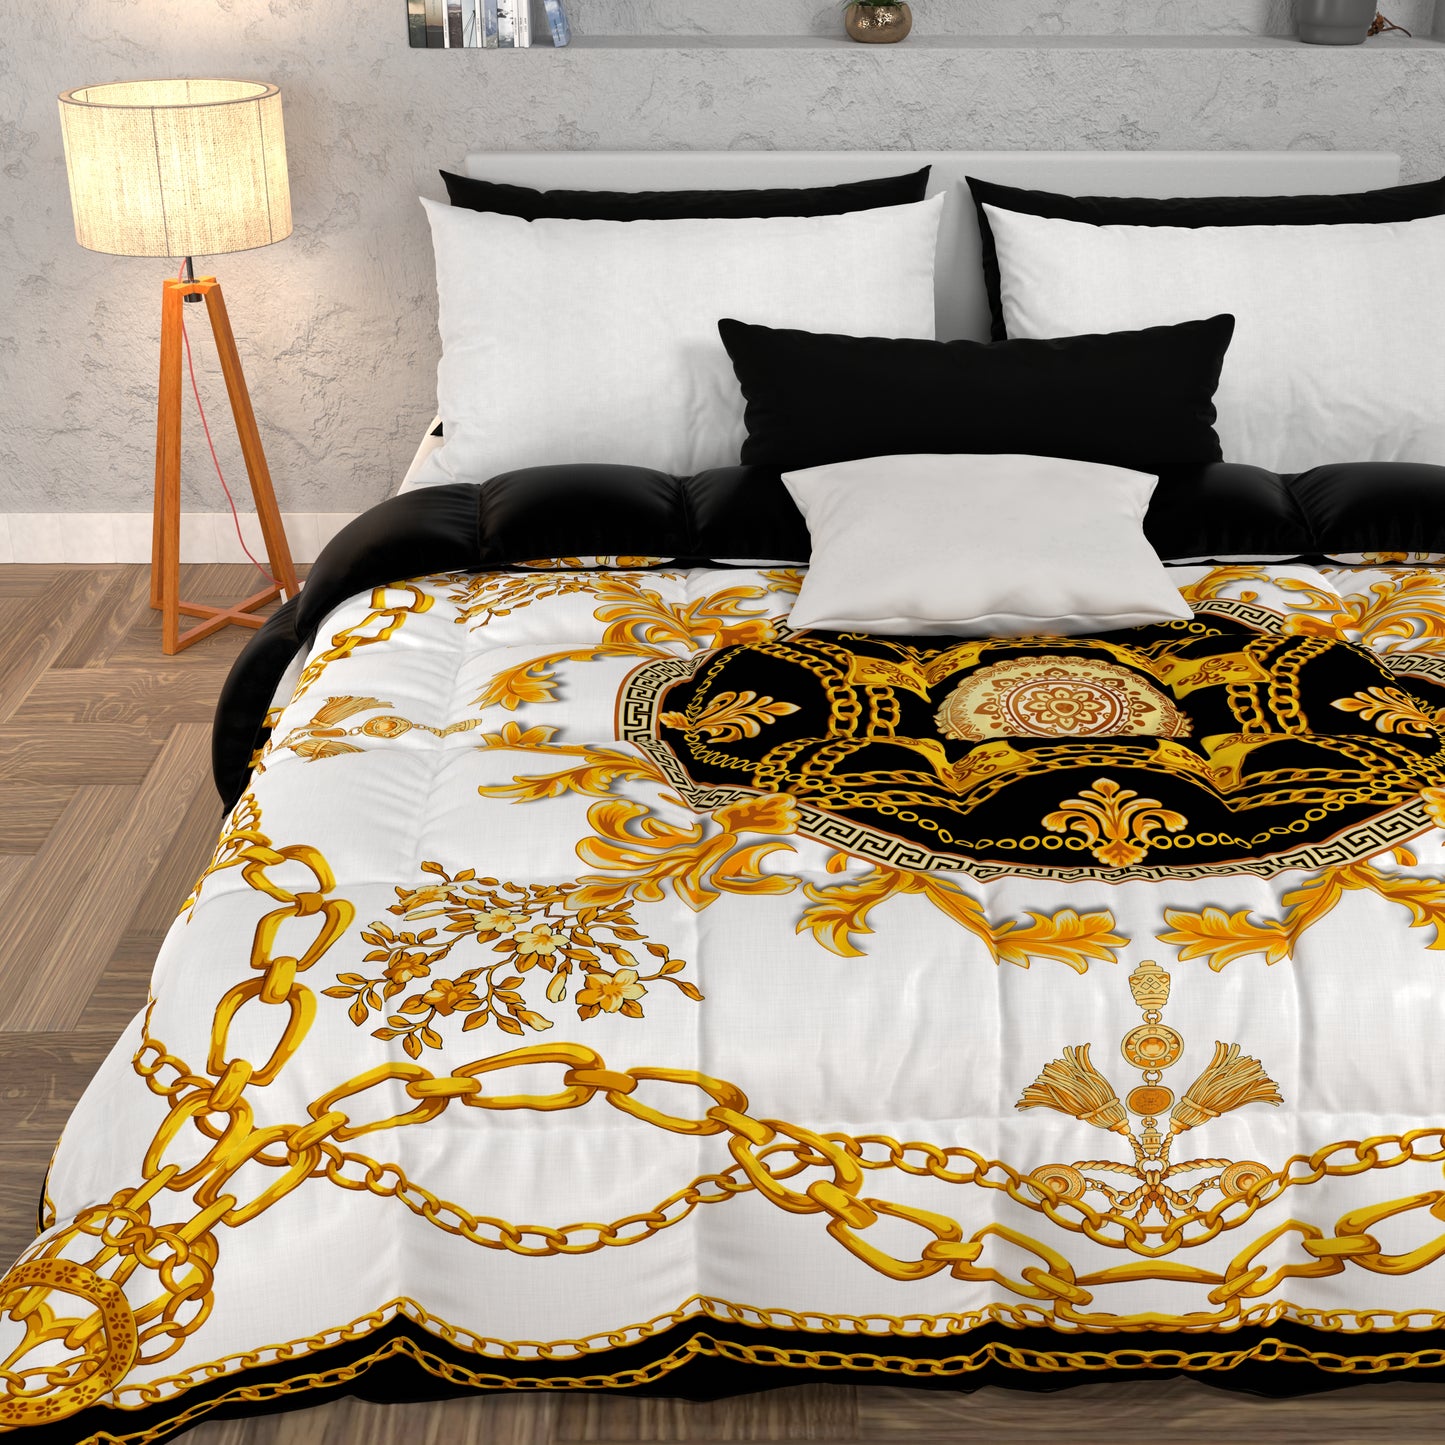 Duvet, Double Quilt, Single, Square and Half, Chains